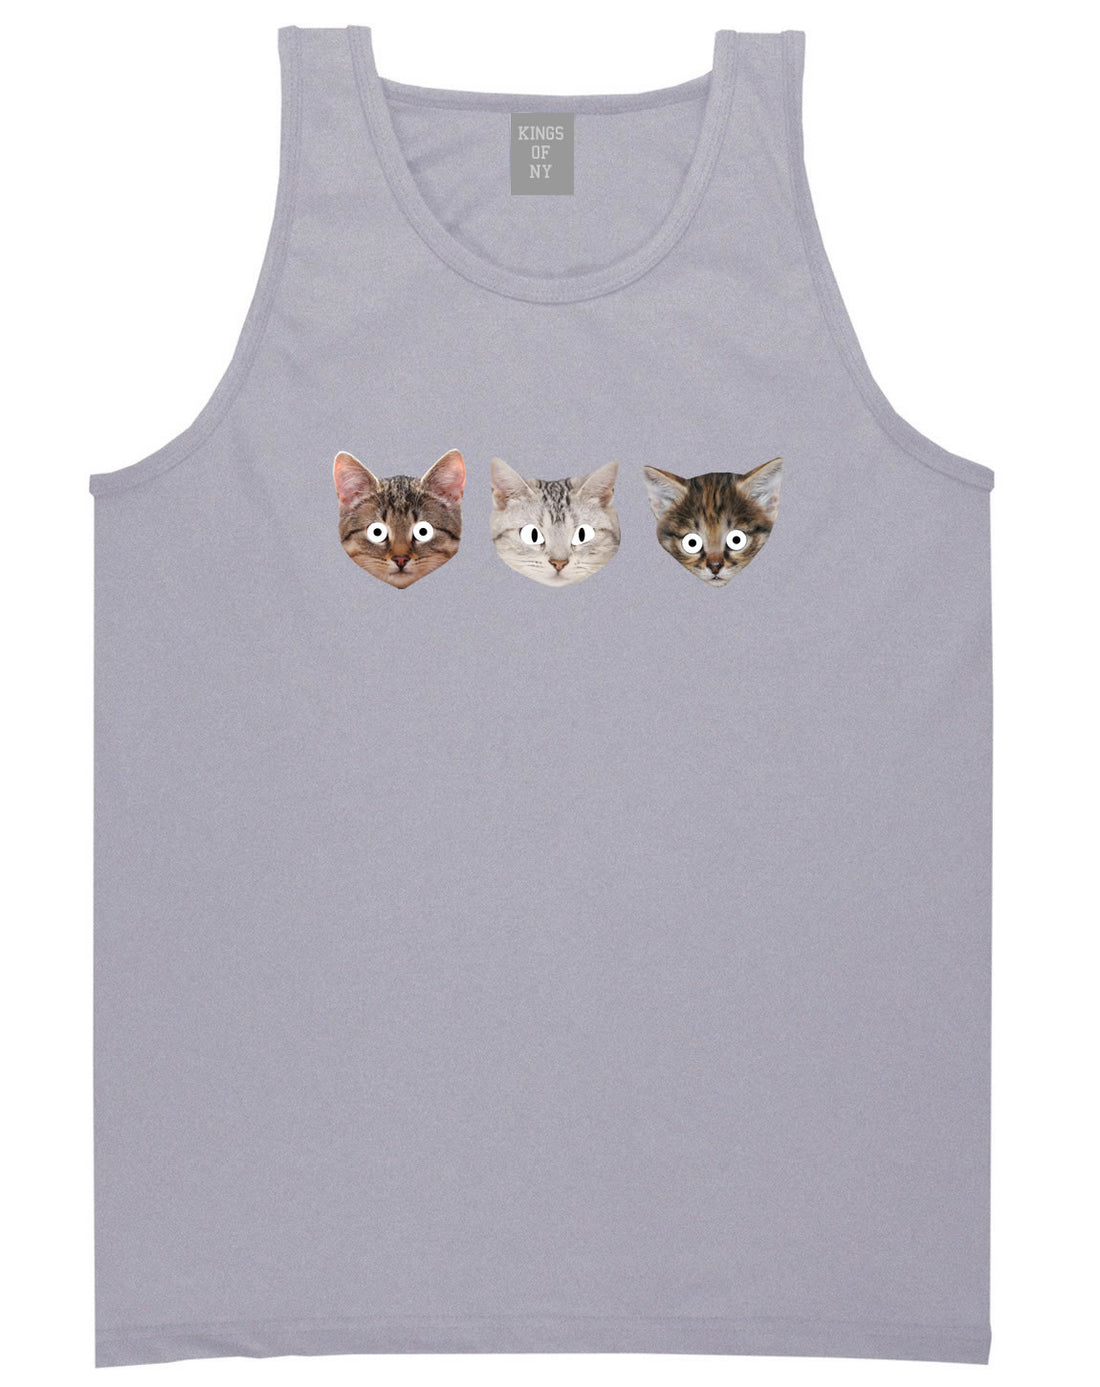 Cats Crazy Kittens Tank Top in Grey By Kings Of NY